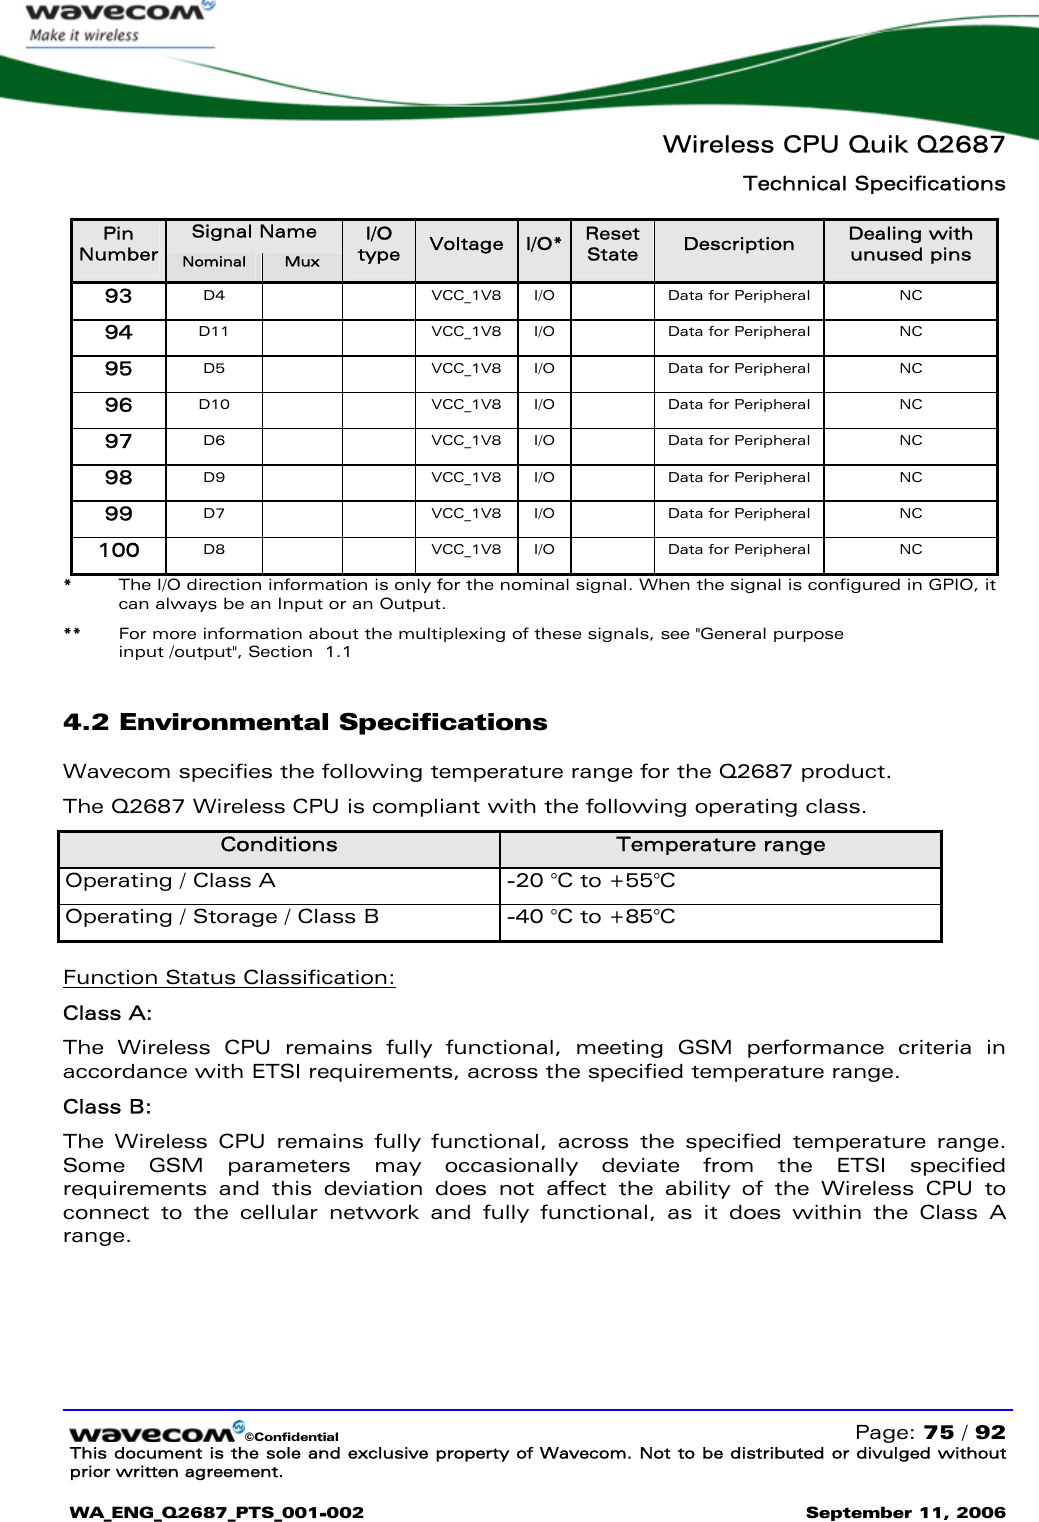   Wireless CPU Quik Q2687 Technical Specifications   ©Confidential   Page: 75 / 92 This document is the sole and exclusive property of Wavecom. Not to be distributed or divulged without prior written agreement.  WA_ENG_Q2687_PTS_001-002 September 11, 2006   Signal Name Pin Number  Nominal  Mux I/O type  Voltage  I/O*  Reset State  Description  Dealing with unused pins 93  D4   VCC_1V8  I/O    Data for Peripheral  NC 94  D11    VCC_1V8  I/O    Data for Peripheral  NC 95  D5   VCC_1V8  I/O    Data for Peripheral  NC 96  D10    VCC_1V8  I/O    Data for Peripheral  NC 97  D6   VCC_1V8  I/O    Data for Peripheral  NC 98  D9   VCC_1V8  I/O    Data for Peripheral  NC 99  D7   VCC_1V8  I/O    Data for Peripheral  NC 100  D8   VCC_1V8  I/O    Data for Peripheral  NC *   The I/O direction information is only for the nominal signal. When the signal is configured in GPIO, it can always be an Input or an Output. **  For more information about the multiplexing of these signals, see &quot;General purpose  input /output&quot;, Section  1.1 4.2 Environmental Specifications Wavecom specifies the following temperature range for the Q2687 product. The Q2687 Wireless CPU is compliant with the following operating class. Conditions Temperature range Operating / Class A -20 °C to +55°C Operating / Storage / Class B  -40 °C to +85°C  Function Status Classification: Class A:    The Wireless CPU remains fully functional, meeting GSM performance criteria in accordance with ETSI requirements, across the specified temperature range.   Class B:    The Wireless CPU remains fully functional, across the specified temperature range. Some GSM parameters may occasionally deviate from the ETSI specified requirements and this deviation does not affect the ability of the Wireless CPU to connect to the cellular network and fully functional, as it does within the Class A range.  